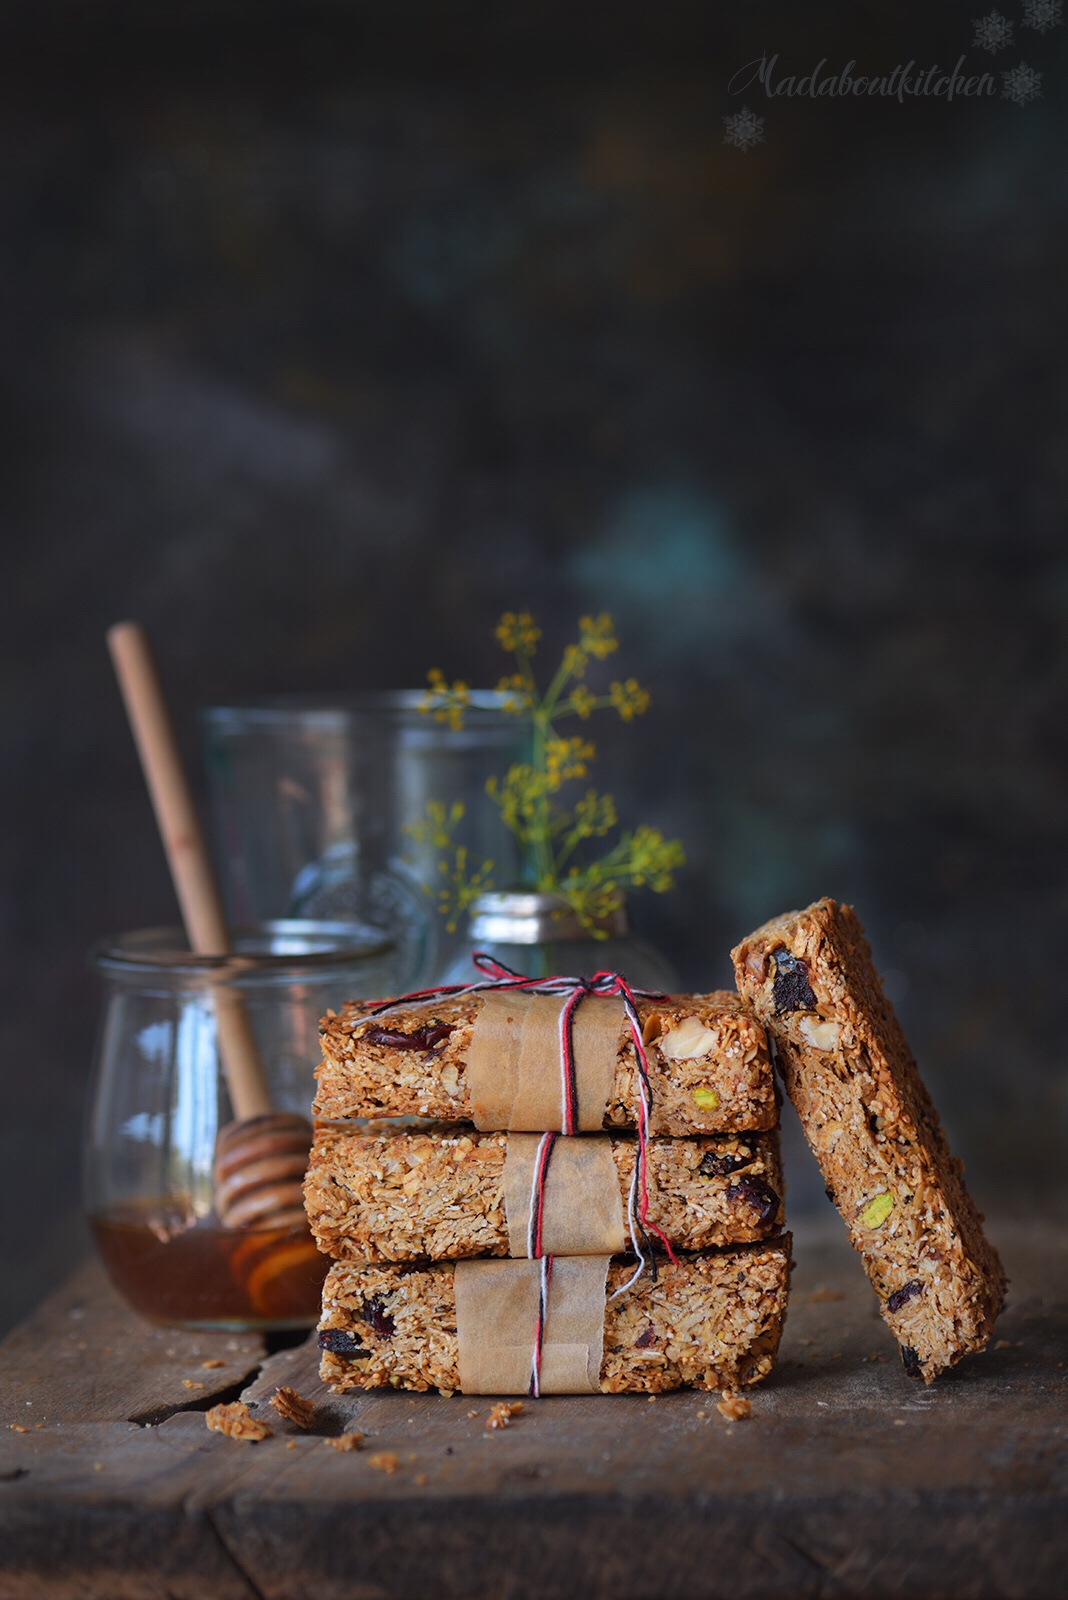 Make Homemade Granola bars with this simple, easy, foolproof recipe. Granola Bars are one of the healthy snacks you can have during the day. The perfect energy bars you can have before and after your workout.